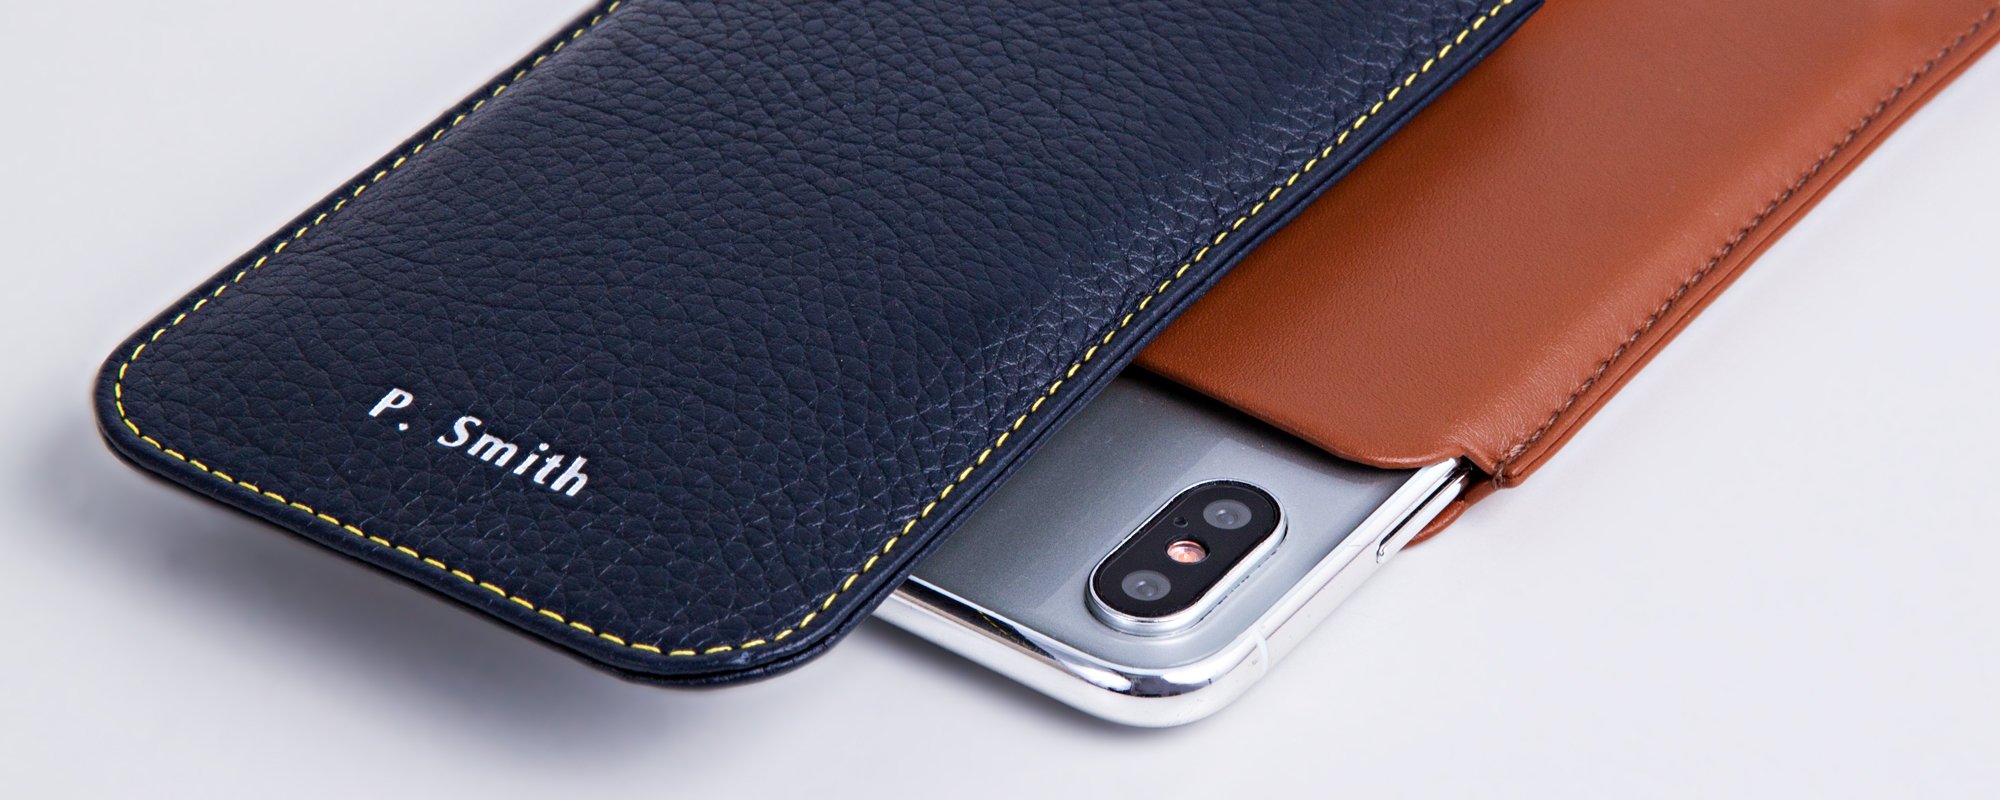 Classic leather case for iPhone X